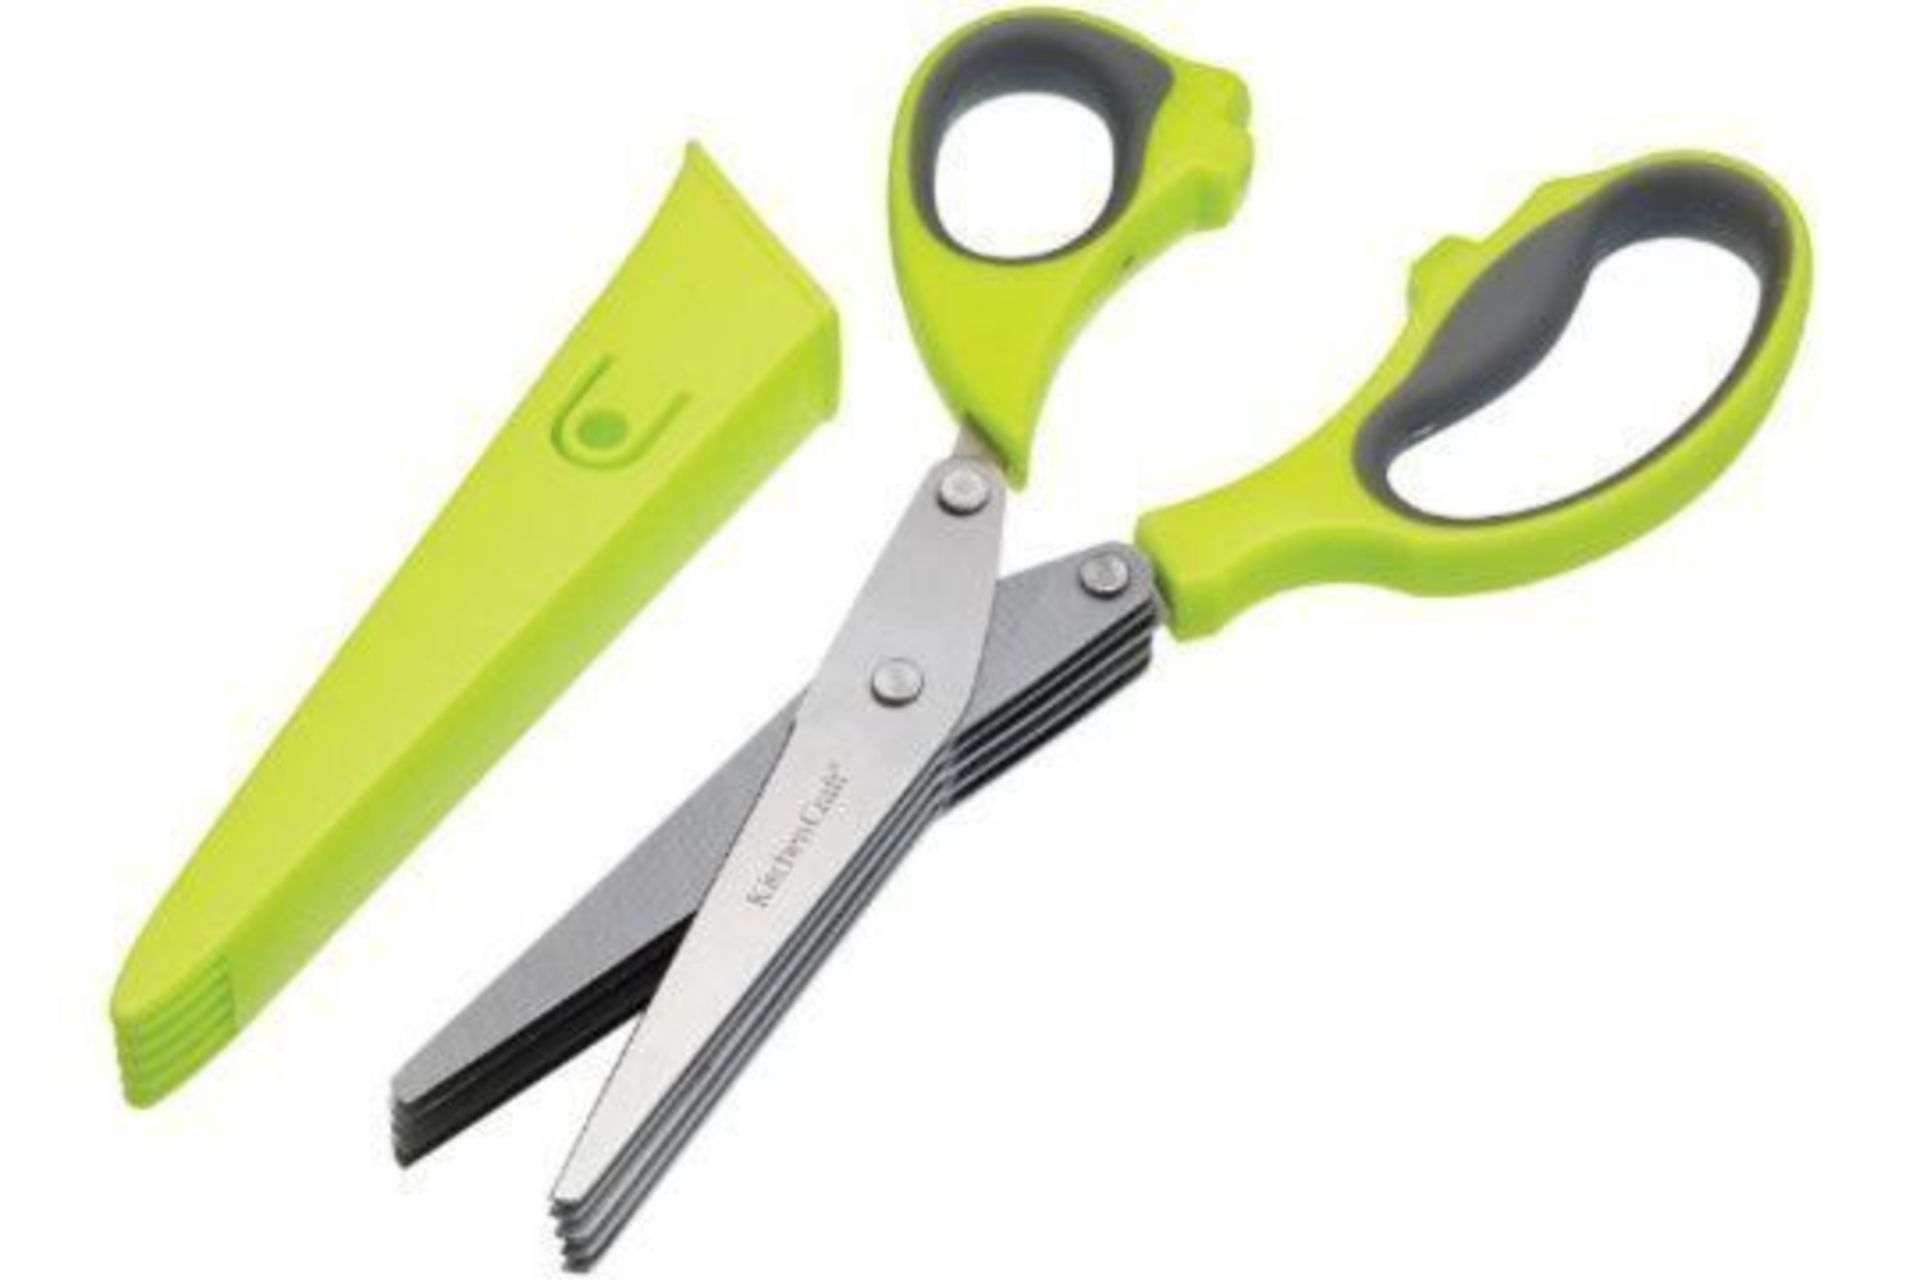 BRAND NEW GARDEN CHEF HERB SCISSORS AND CASE - RRP £7.49.